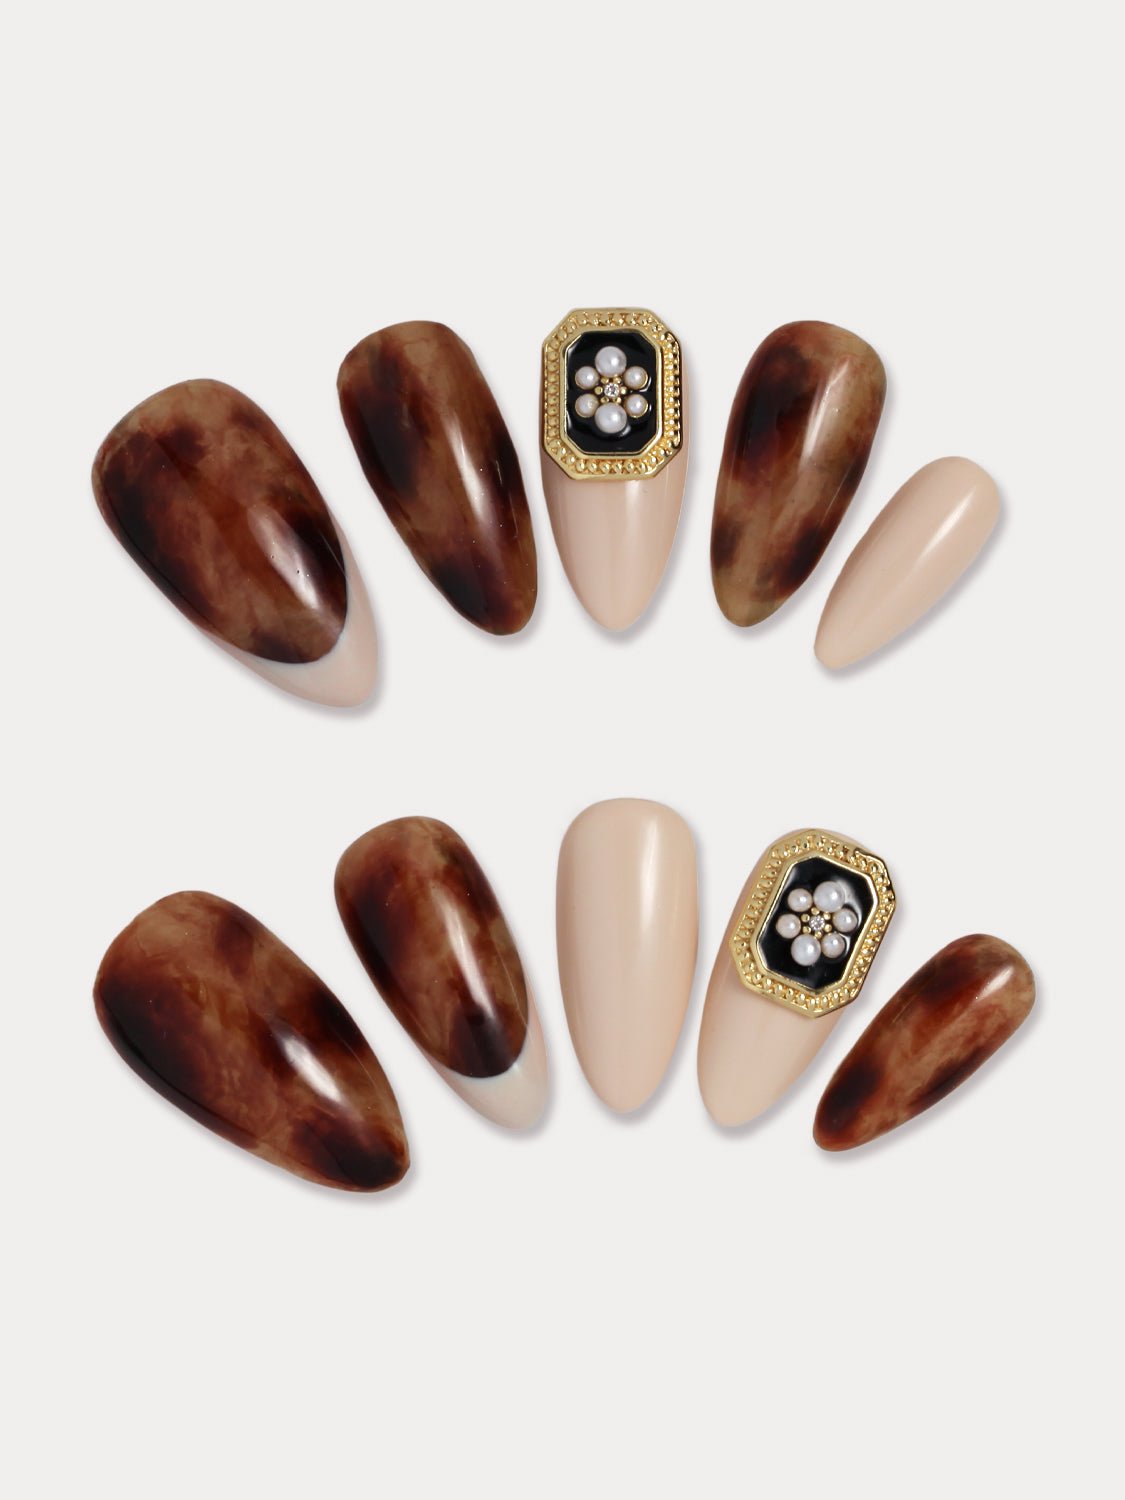 MIEAP Tortoiseshell press-on nail set utilizes advanced gradient techniques, paired with specially curated white color and vintage black and gold accessories, exuding a sense of sophistication. #MIEAP #MIEAPnails #pressonnail #falsenail #acrylicnail #nails #nailart #naildesign #nailinspo #handmadenail #autumnnail #nail2023 #graduationnail #almondnail #brownnail #whitenail #datingnail #promnail  